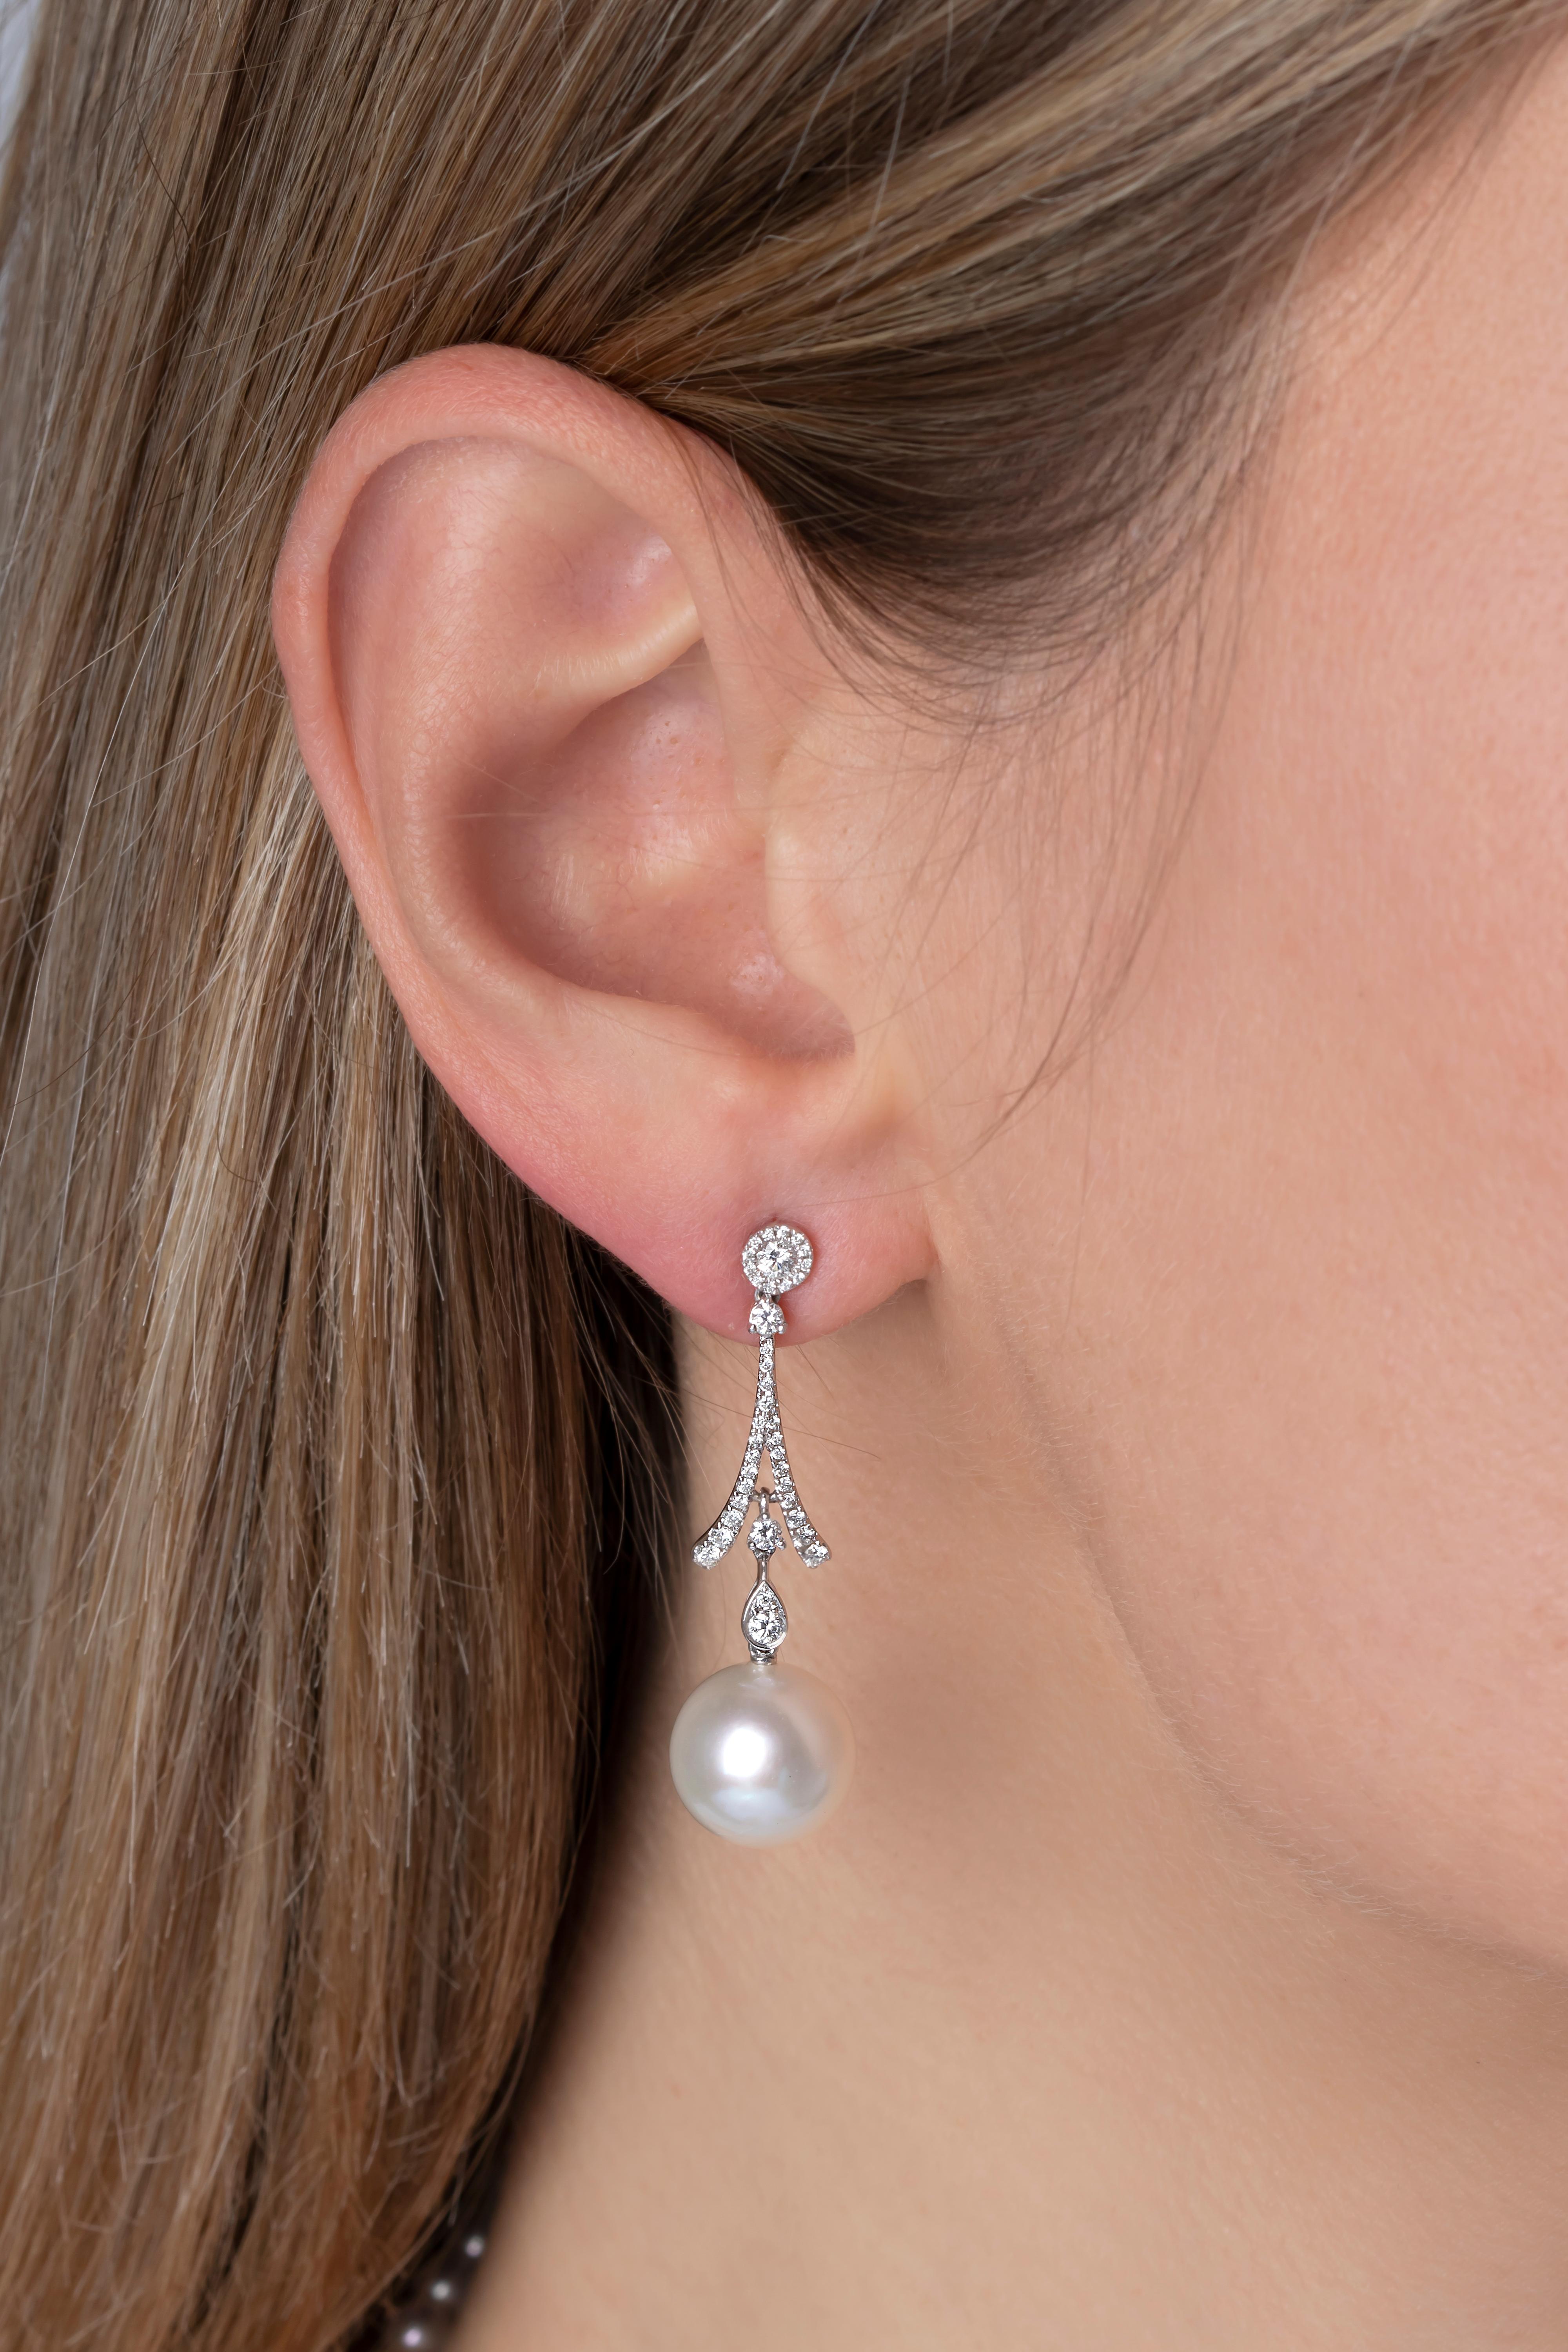 These elegant earrings by Yoko London feature cool South Sea pearls beneath a dazzling arrangement of diamonds. Striking and sophisticated, these earrings will add a touch of glamour to any evening outfit.  
-10-11mm Australian South Sea Pearls 
-78